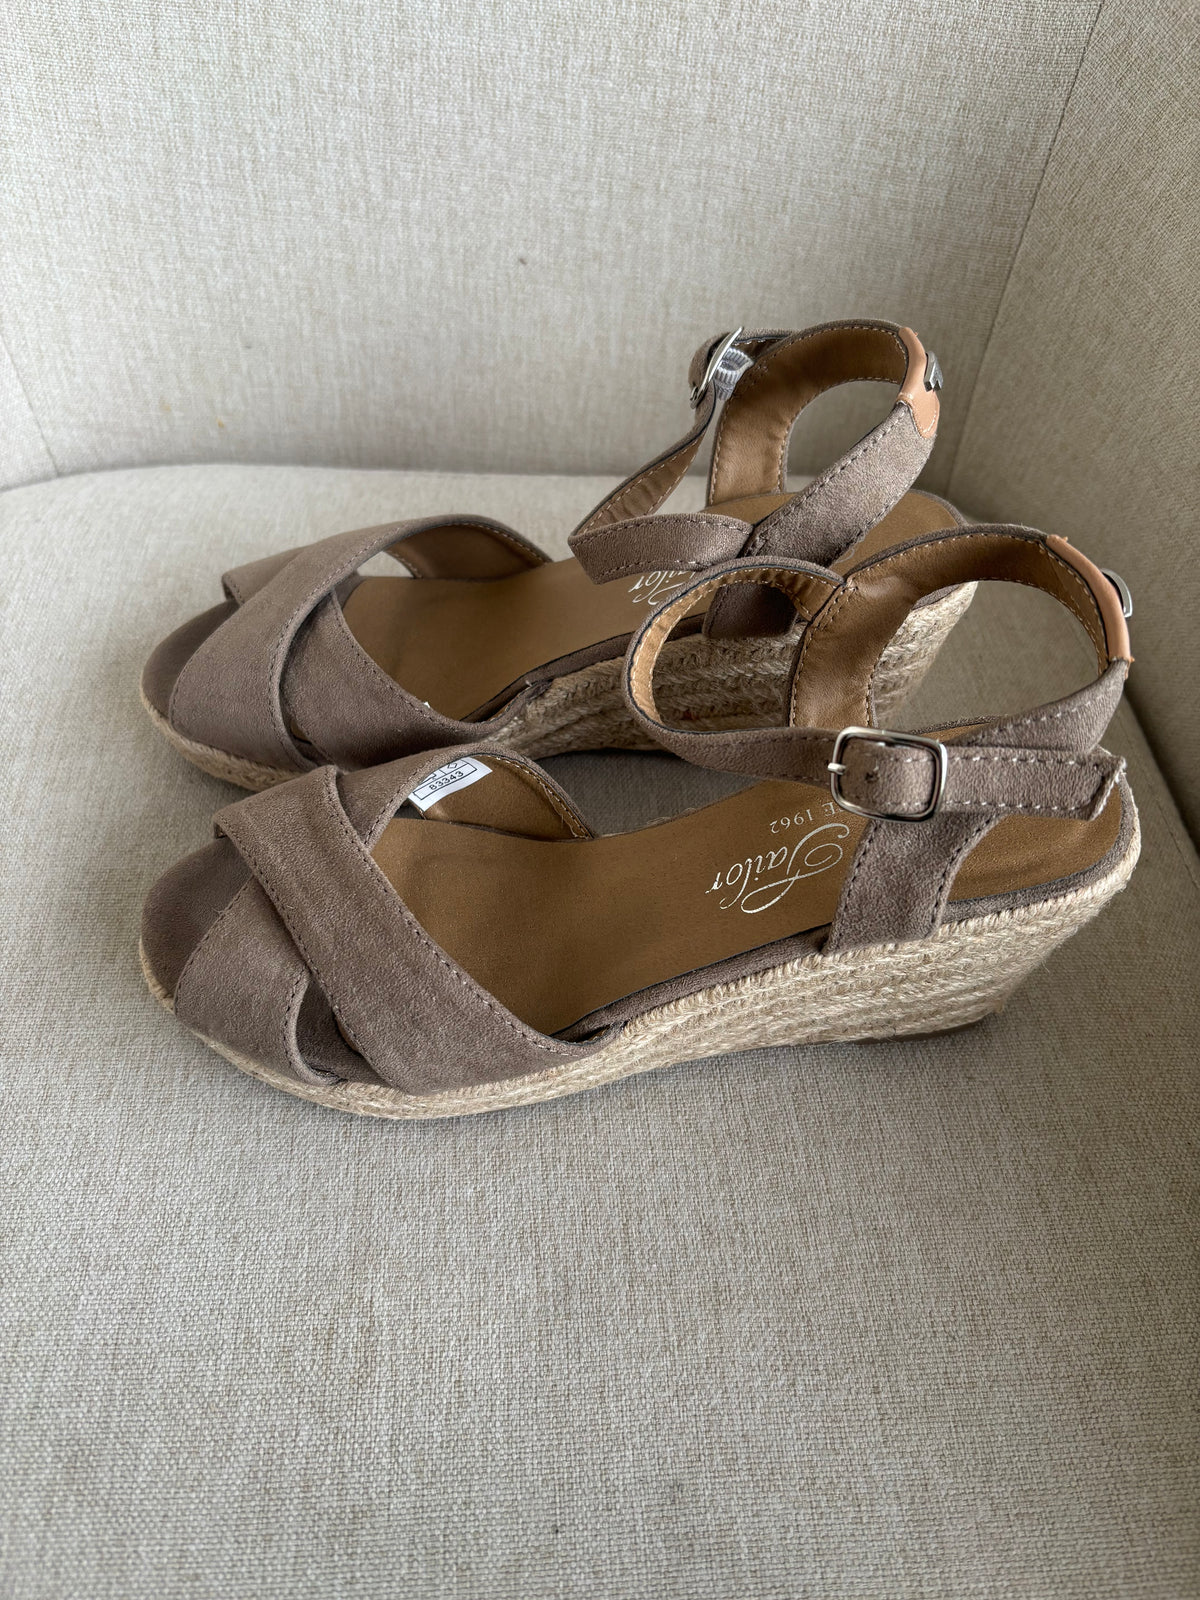 Beige Wedge Sandals by Tom Tailor Size 3